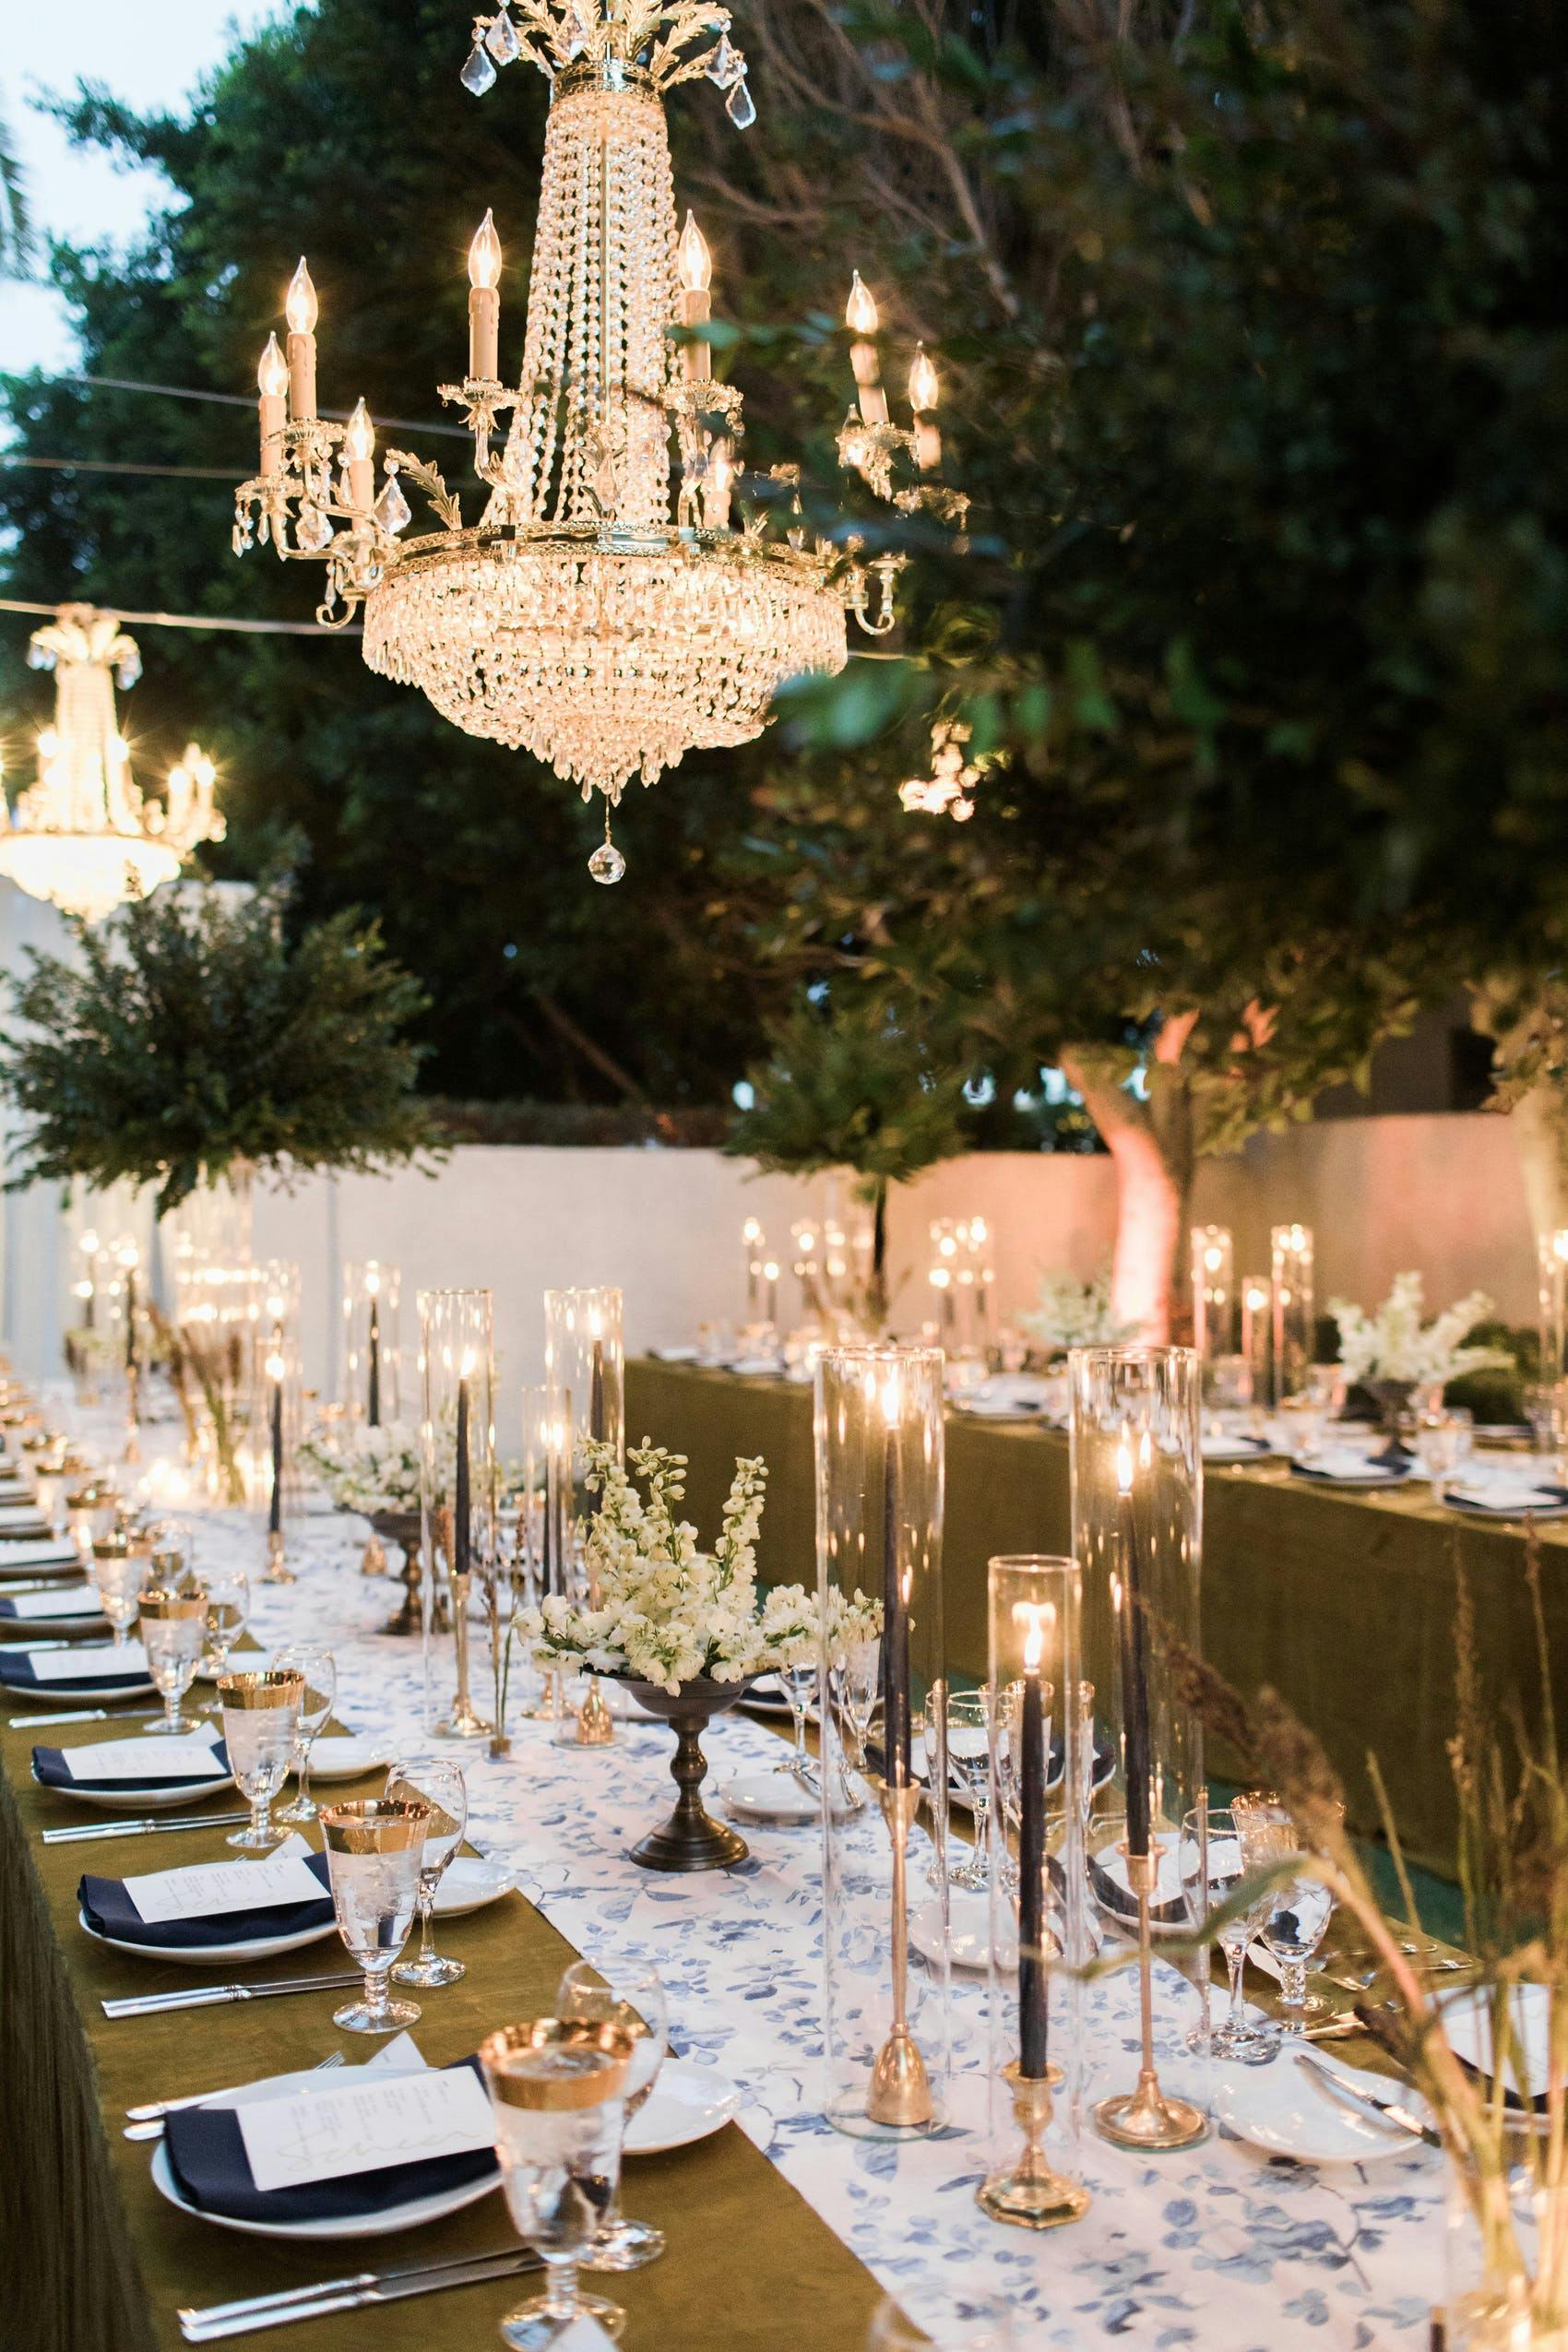 Large black candles with large white chandelier hanging down.